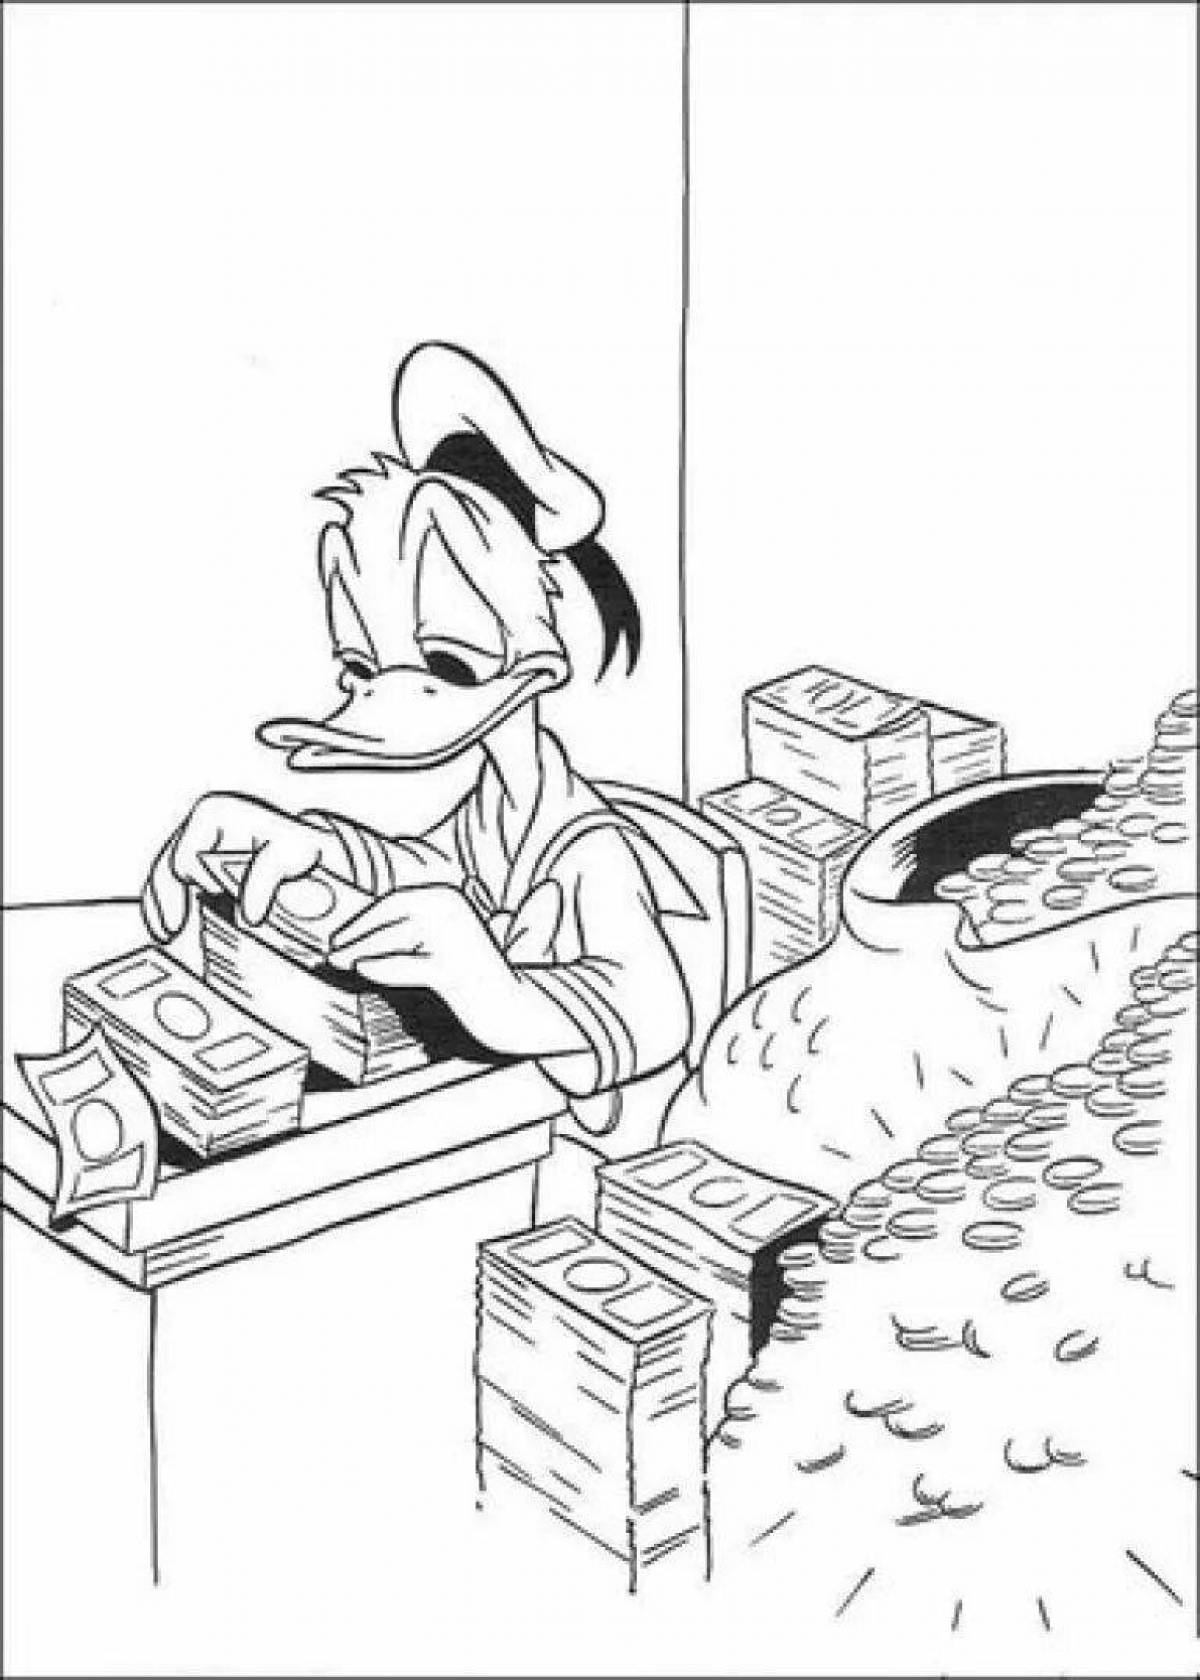 Donald duck with money #6